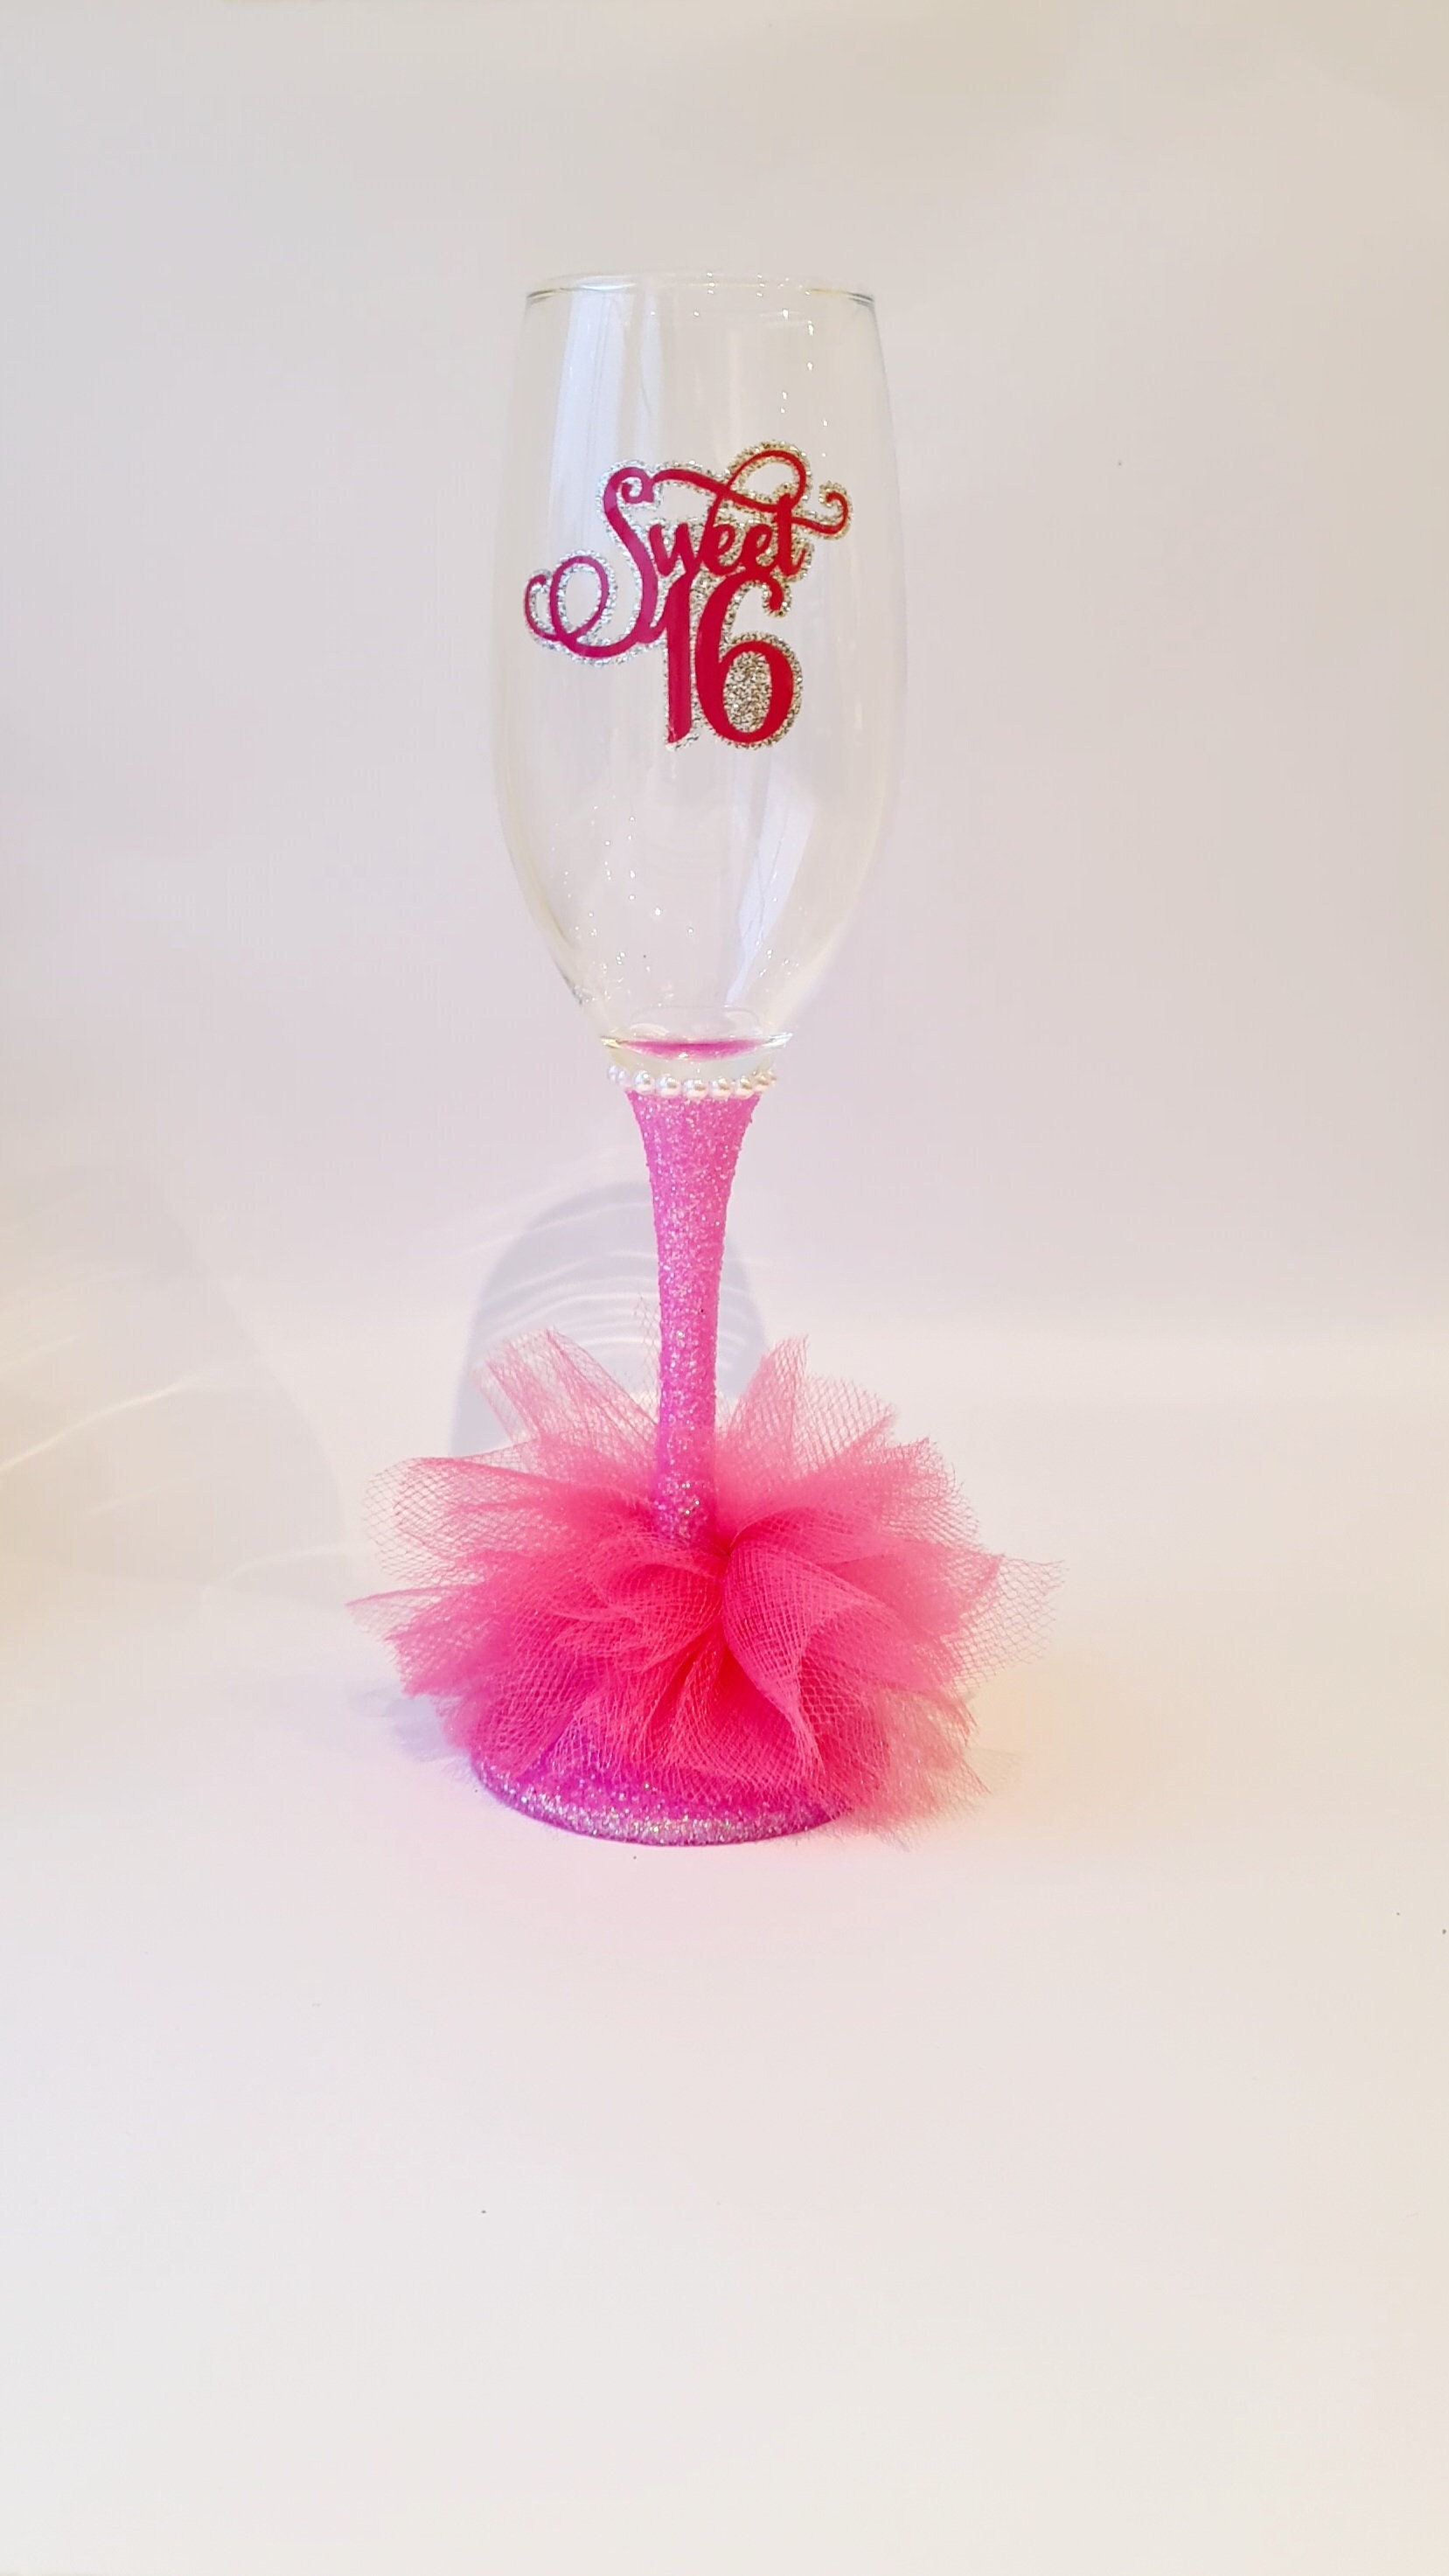 Vintage Style Pressed Glass Champagne Flute - Pink – The Parisian